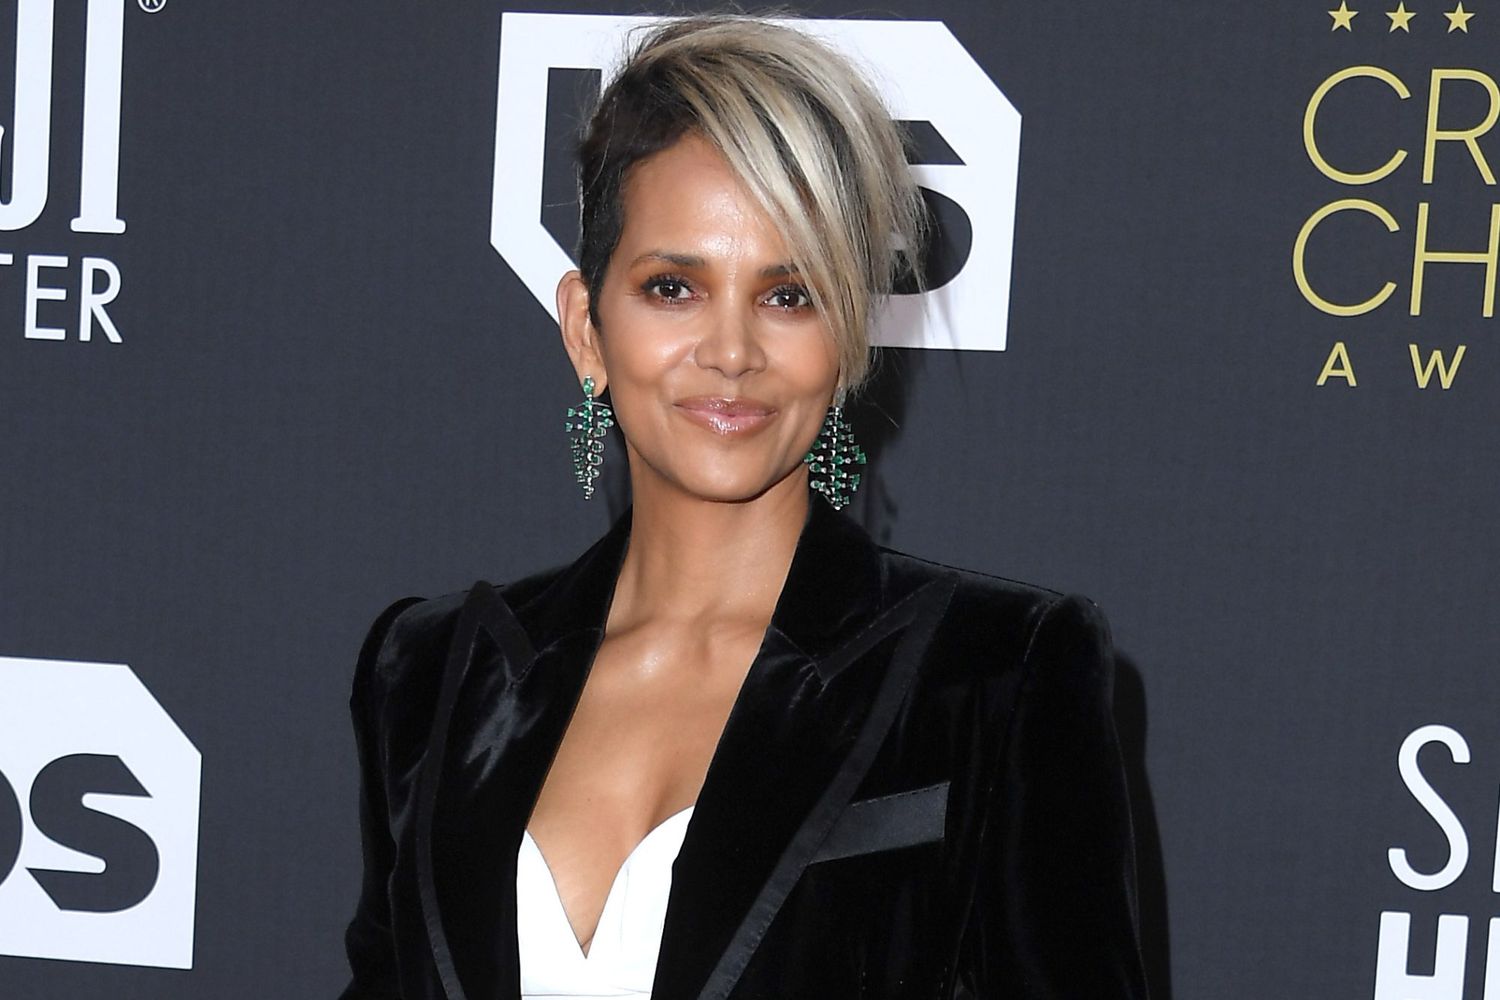 LOS ANGELES, CALIFORNIA - MARCH 13: Halle Berry Poses at the 27th Annual Critics Choice Awards at Fairmont Century Plaza on March 13, 2022 in Los Angeles, California. (Photo by Steve Granitz/Getty Images)